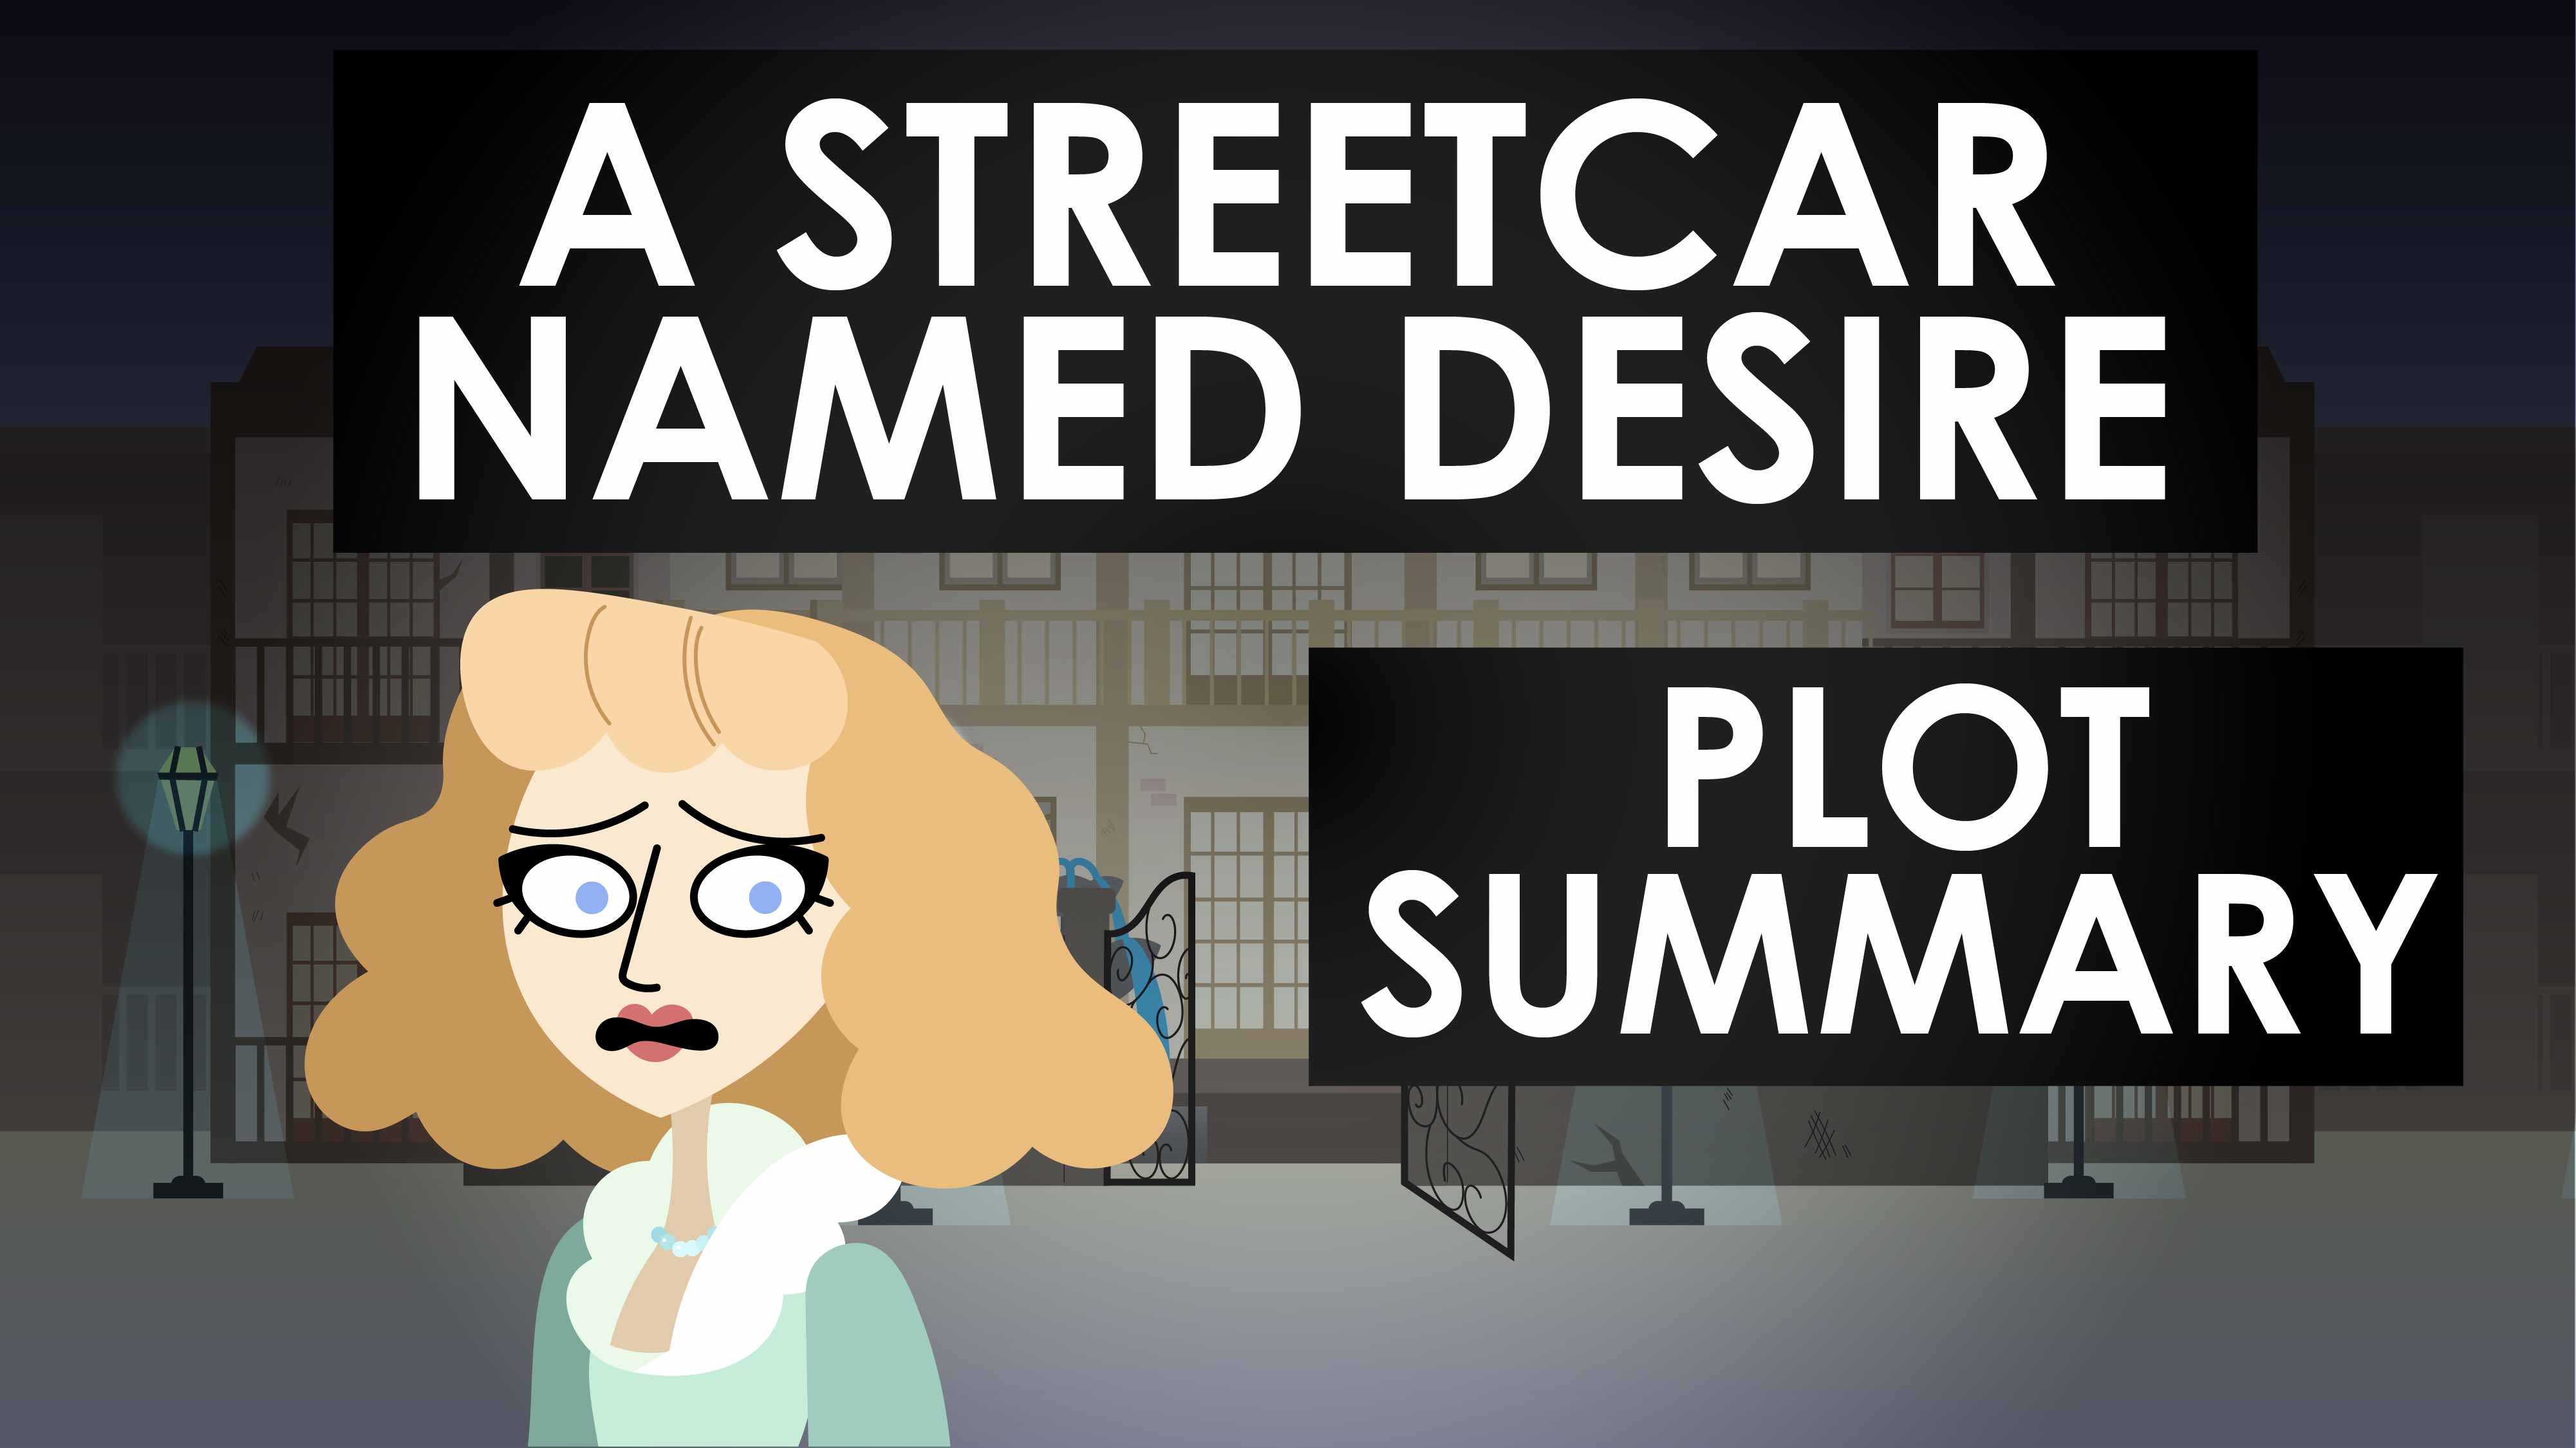 A Streetcar Named Desire - Tennessee Williams - Plot Summary - Destroying Drama Series